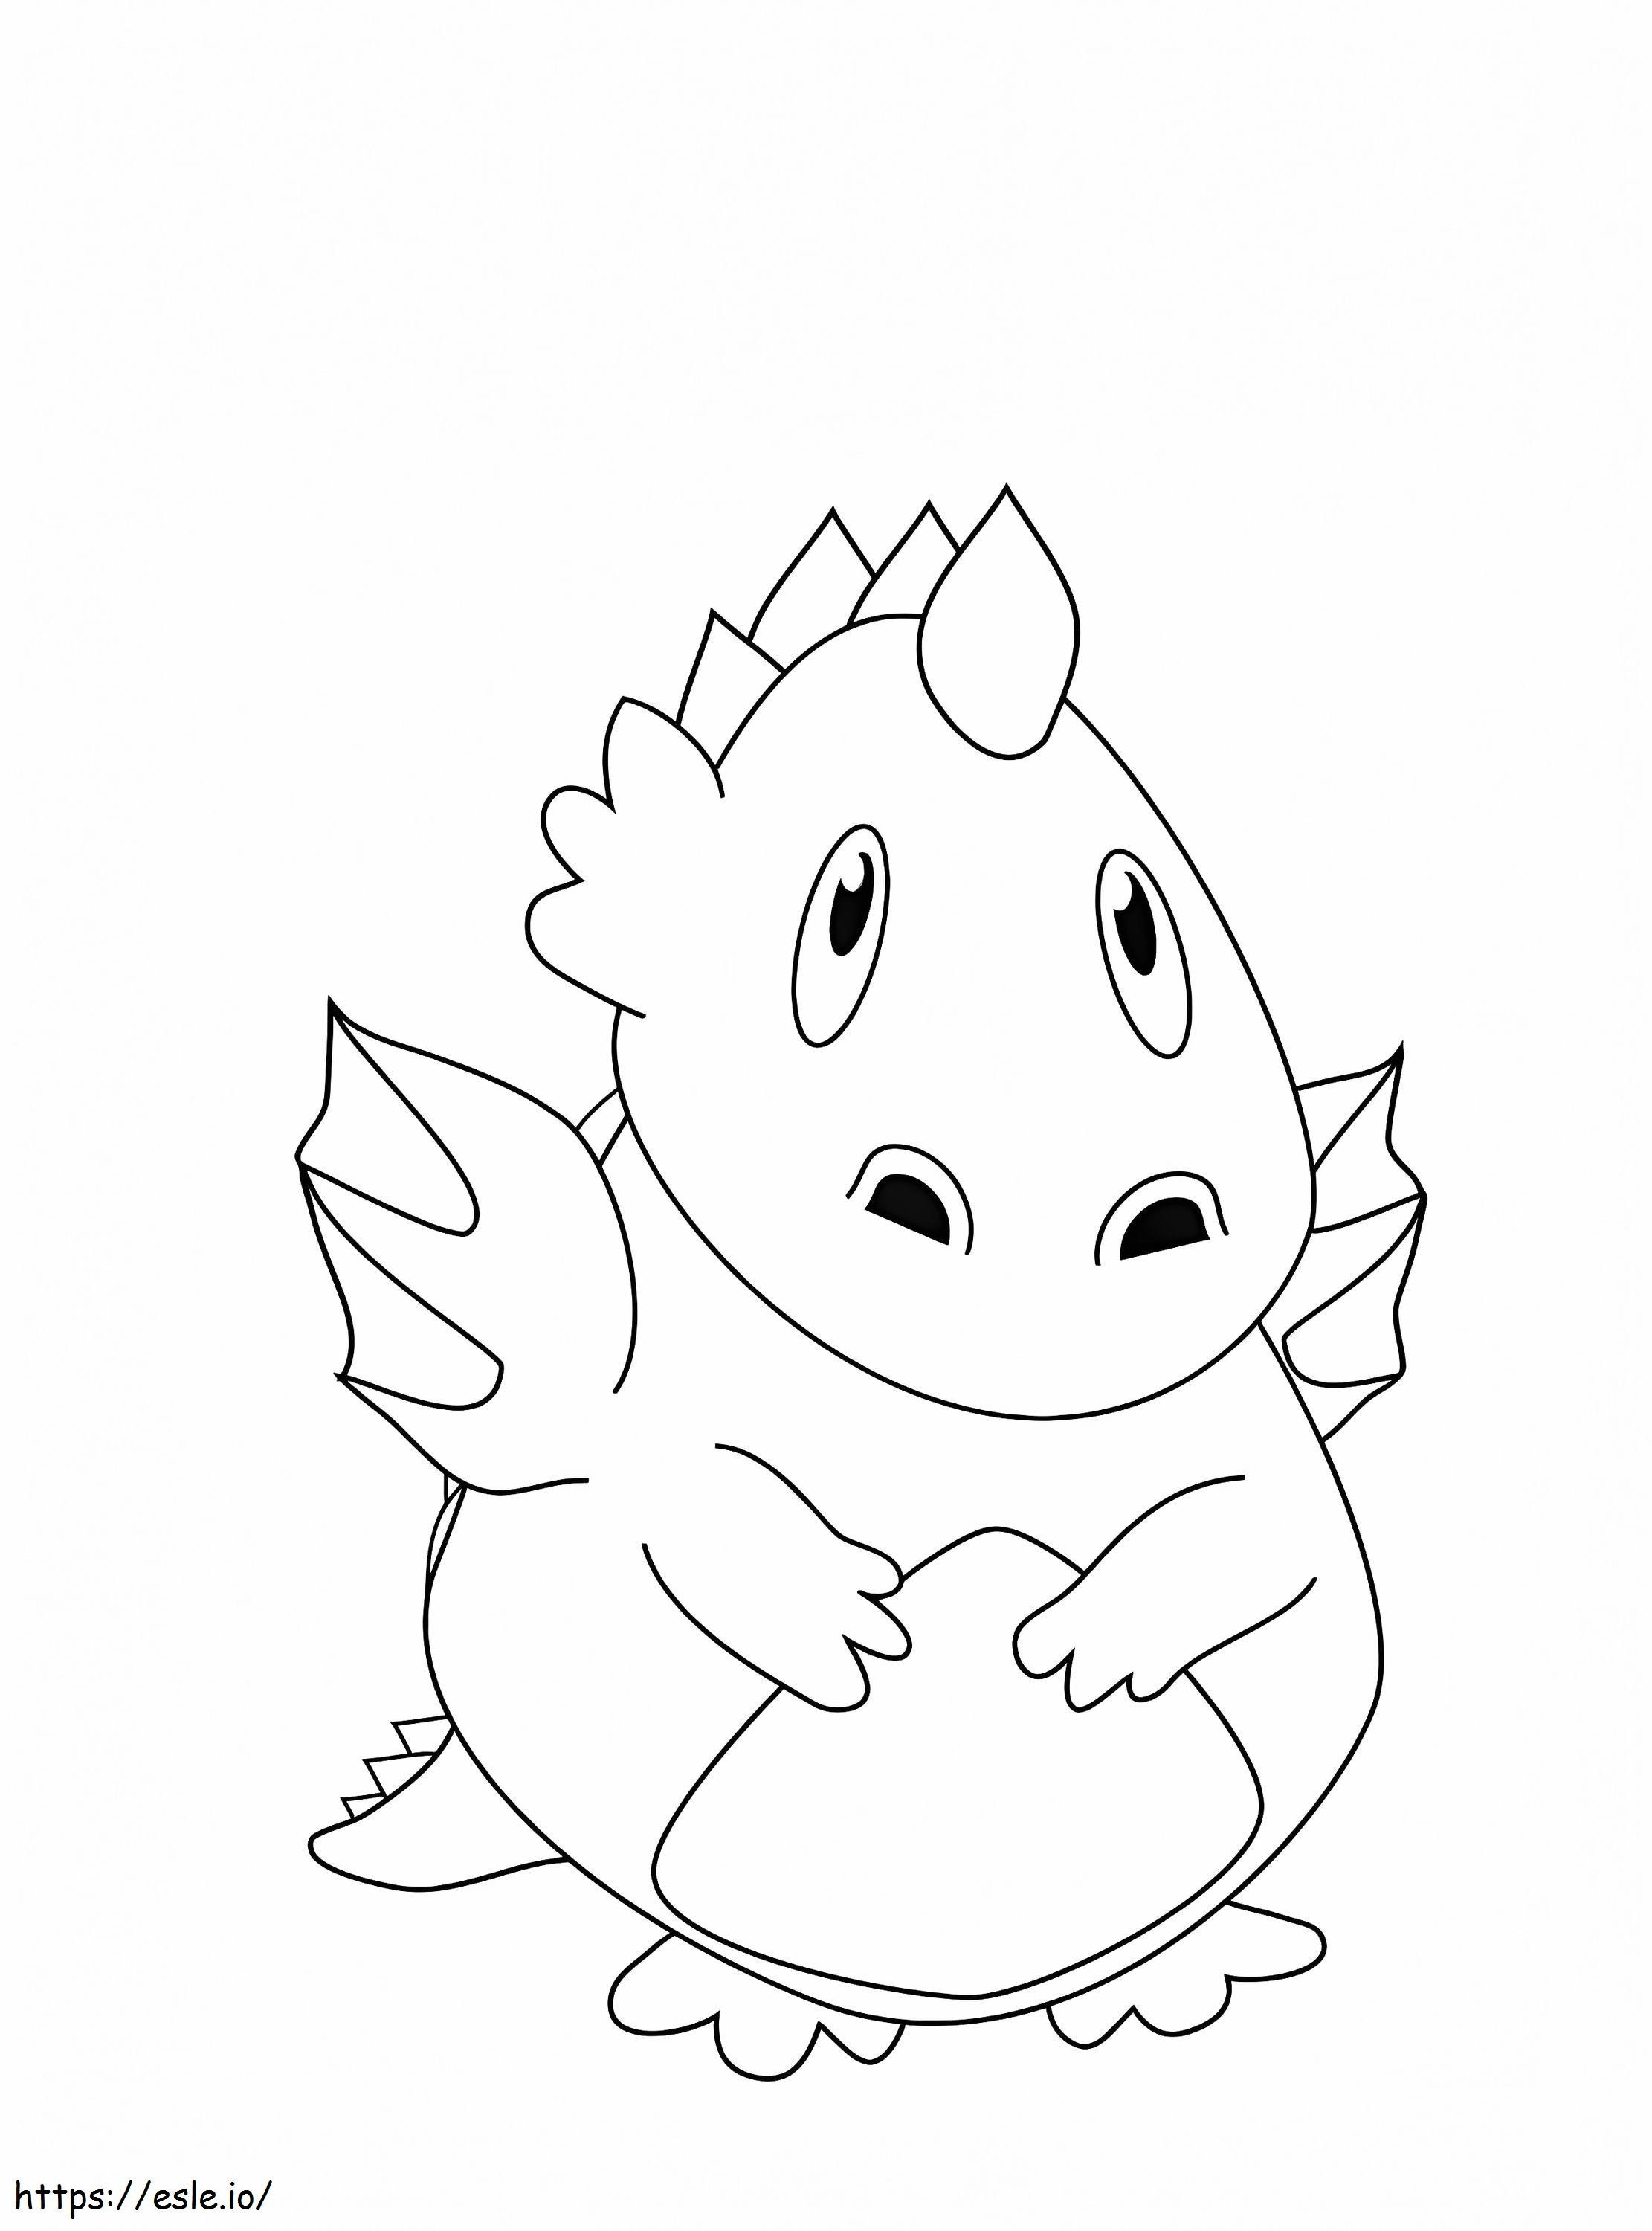 Baby Fat Dragon coloring page